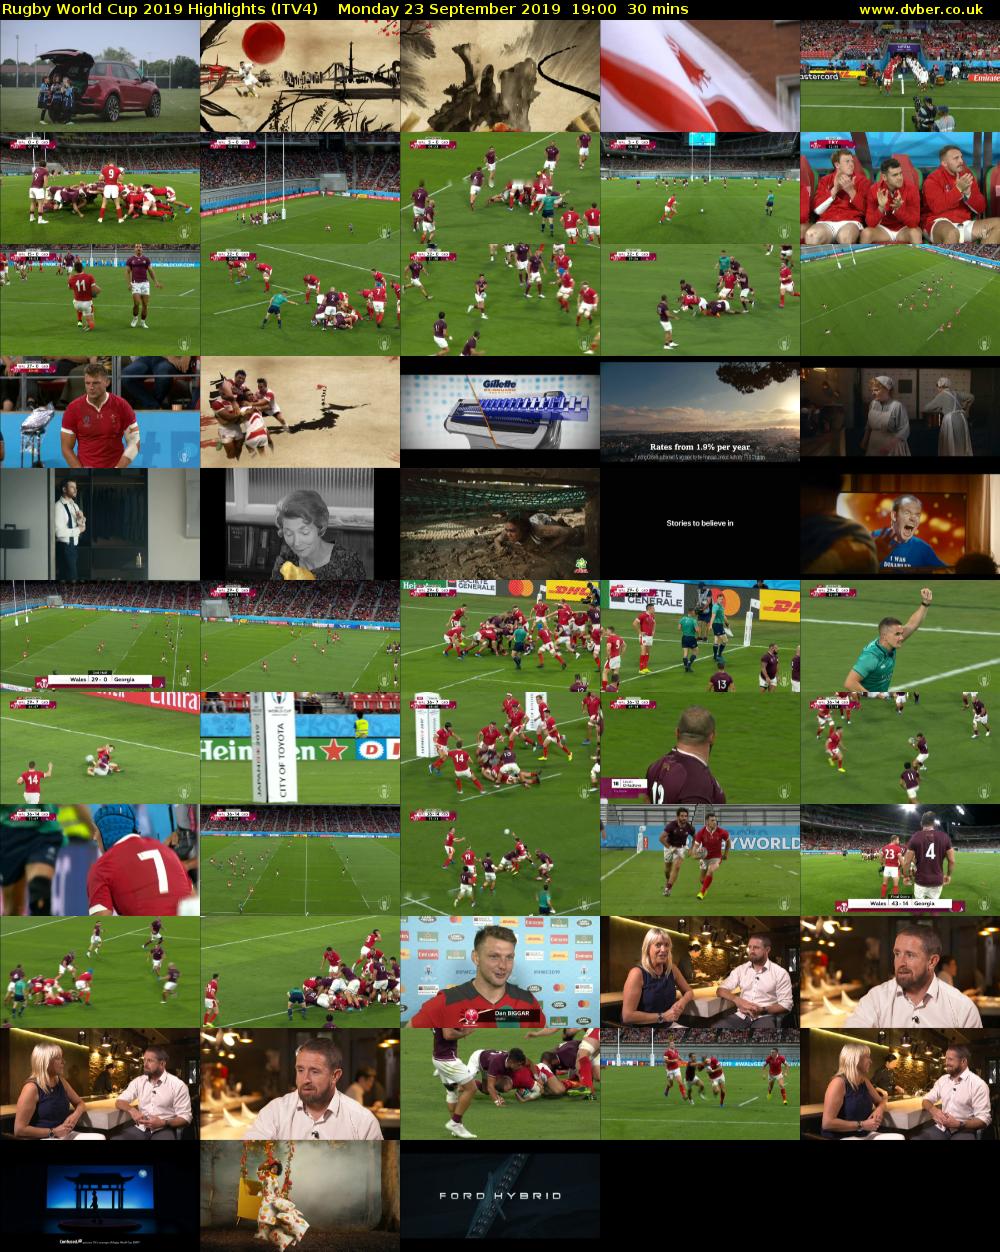 Rugby World Cup 2019 Highlights (ITV4) Monday 23 September 2019 19:00 - 19:30